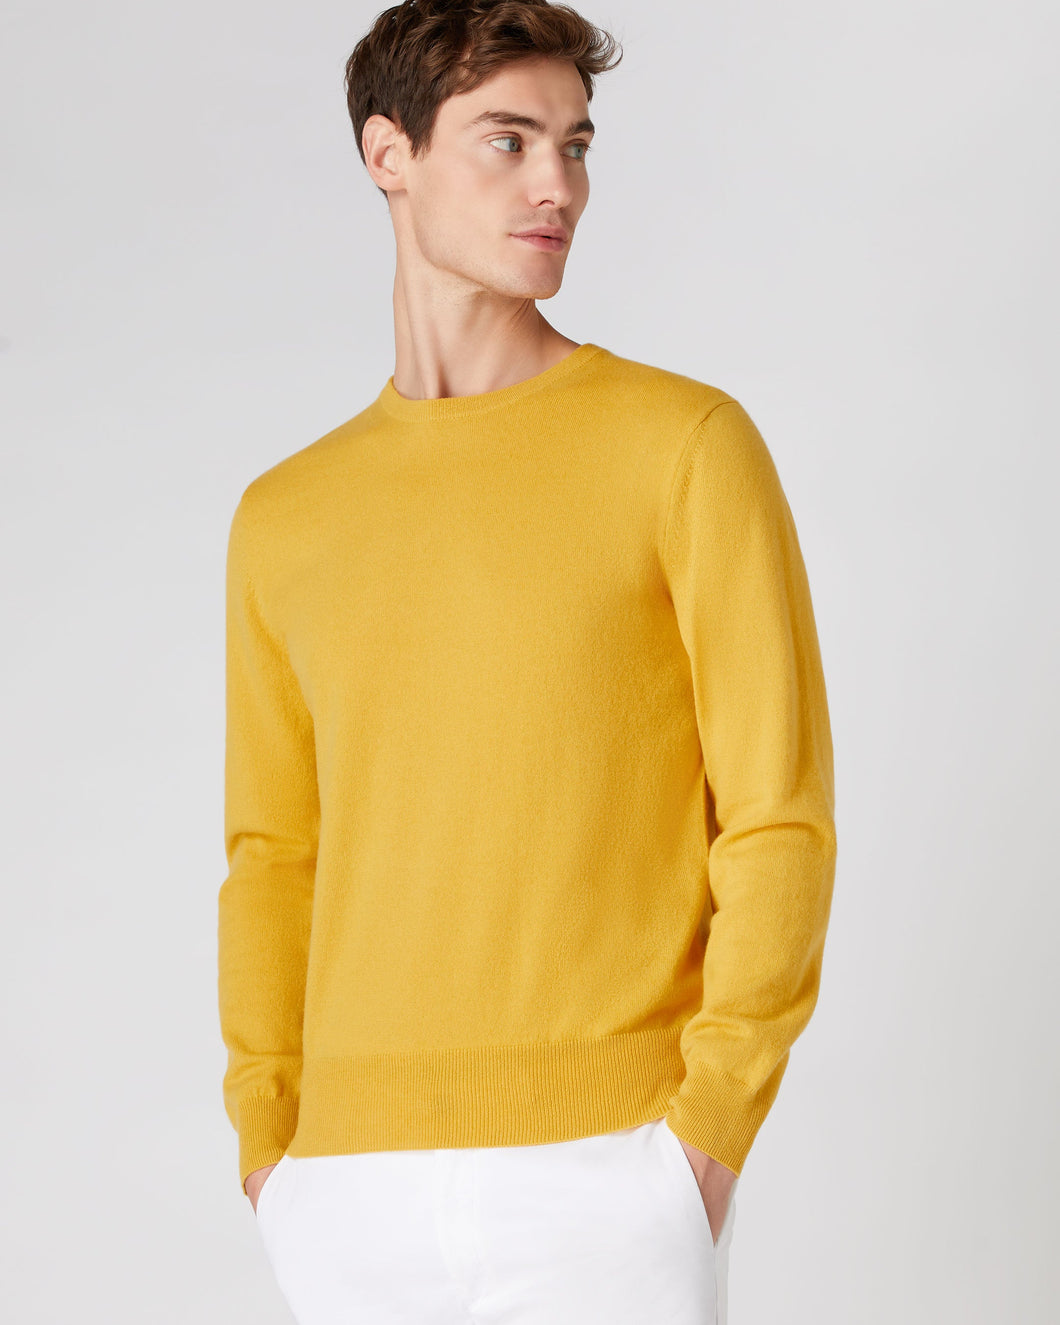 N.Peal Men's The Oxford Round Neck Cashmere Jumper Canary Yellow